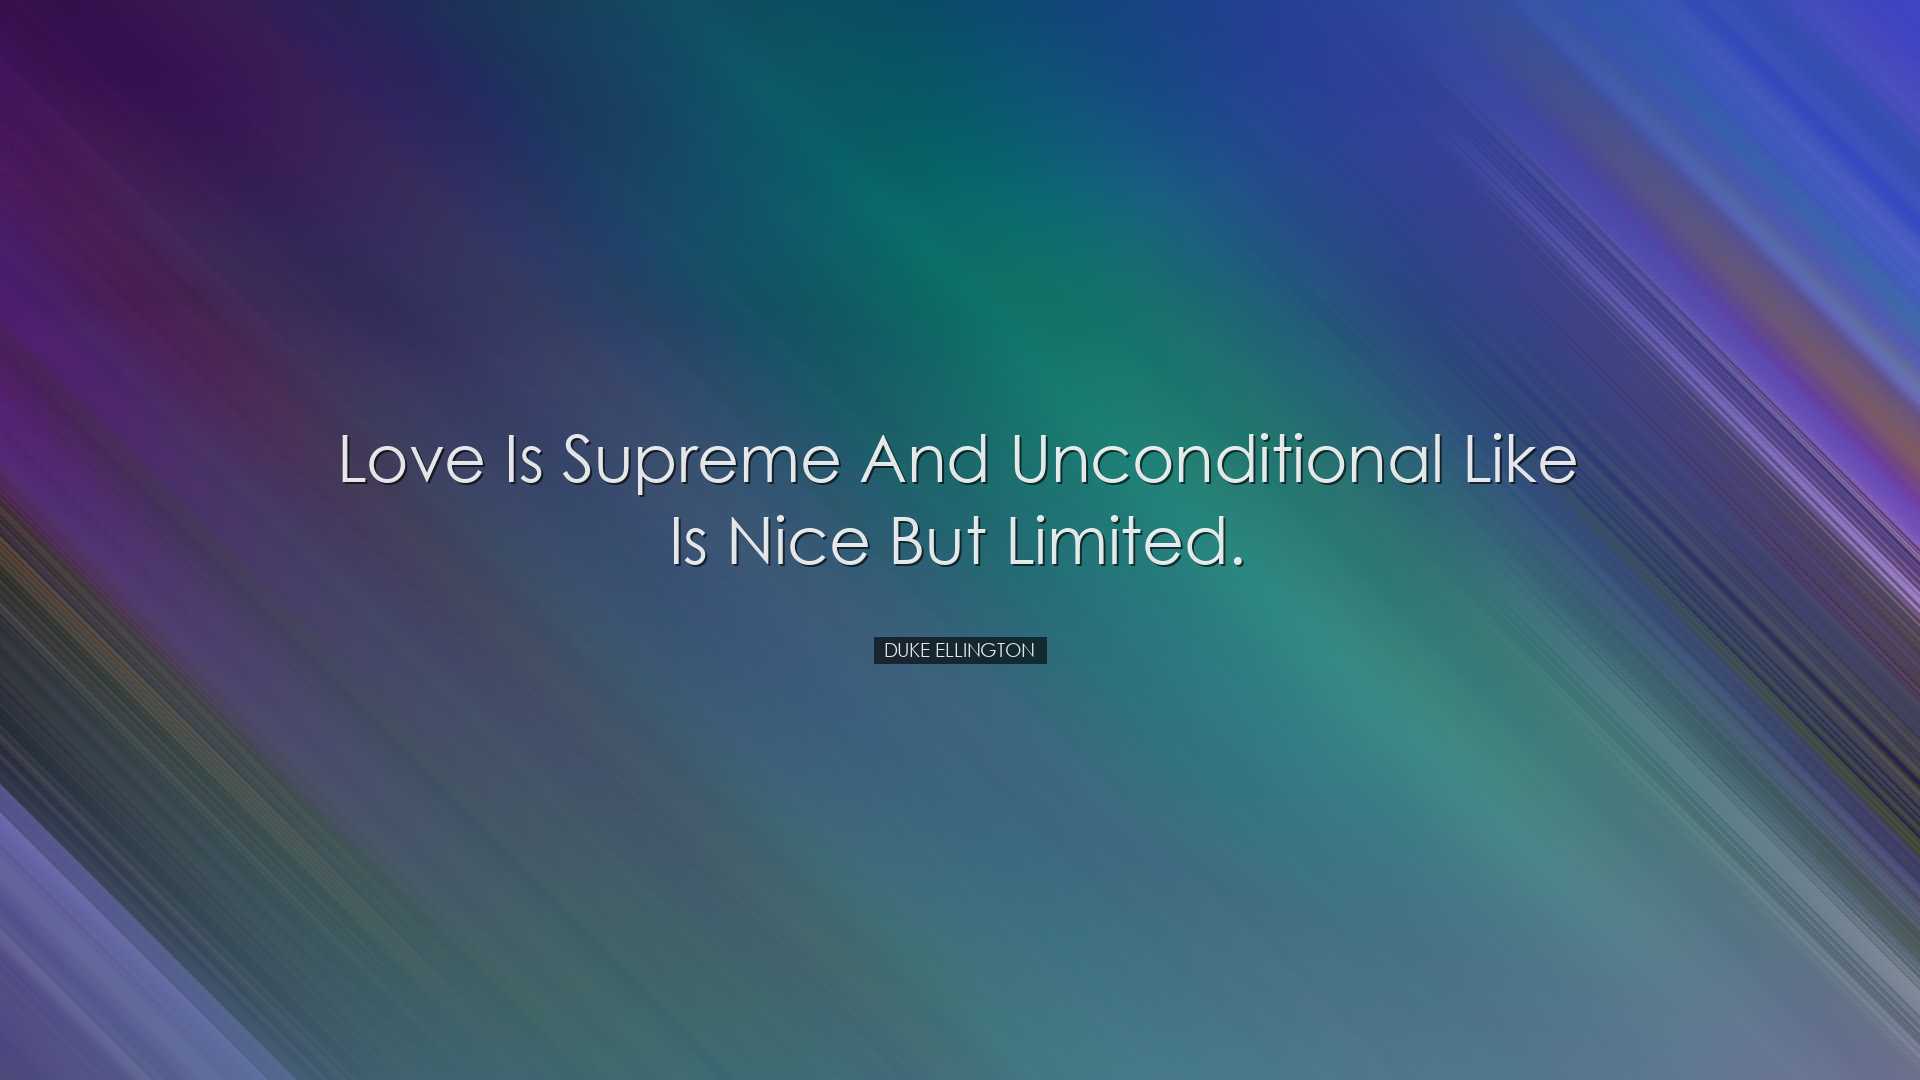 Love is supreme and unconditional like is nice but limited. - Duke